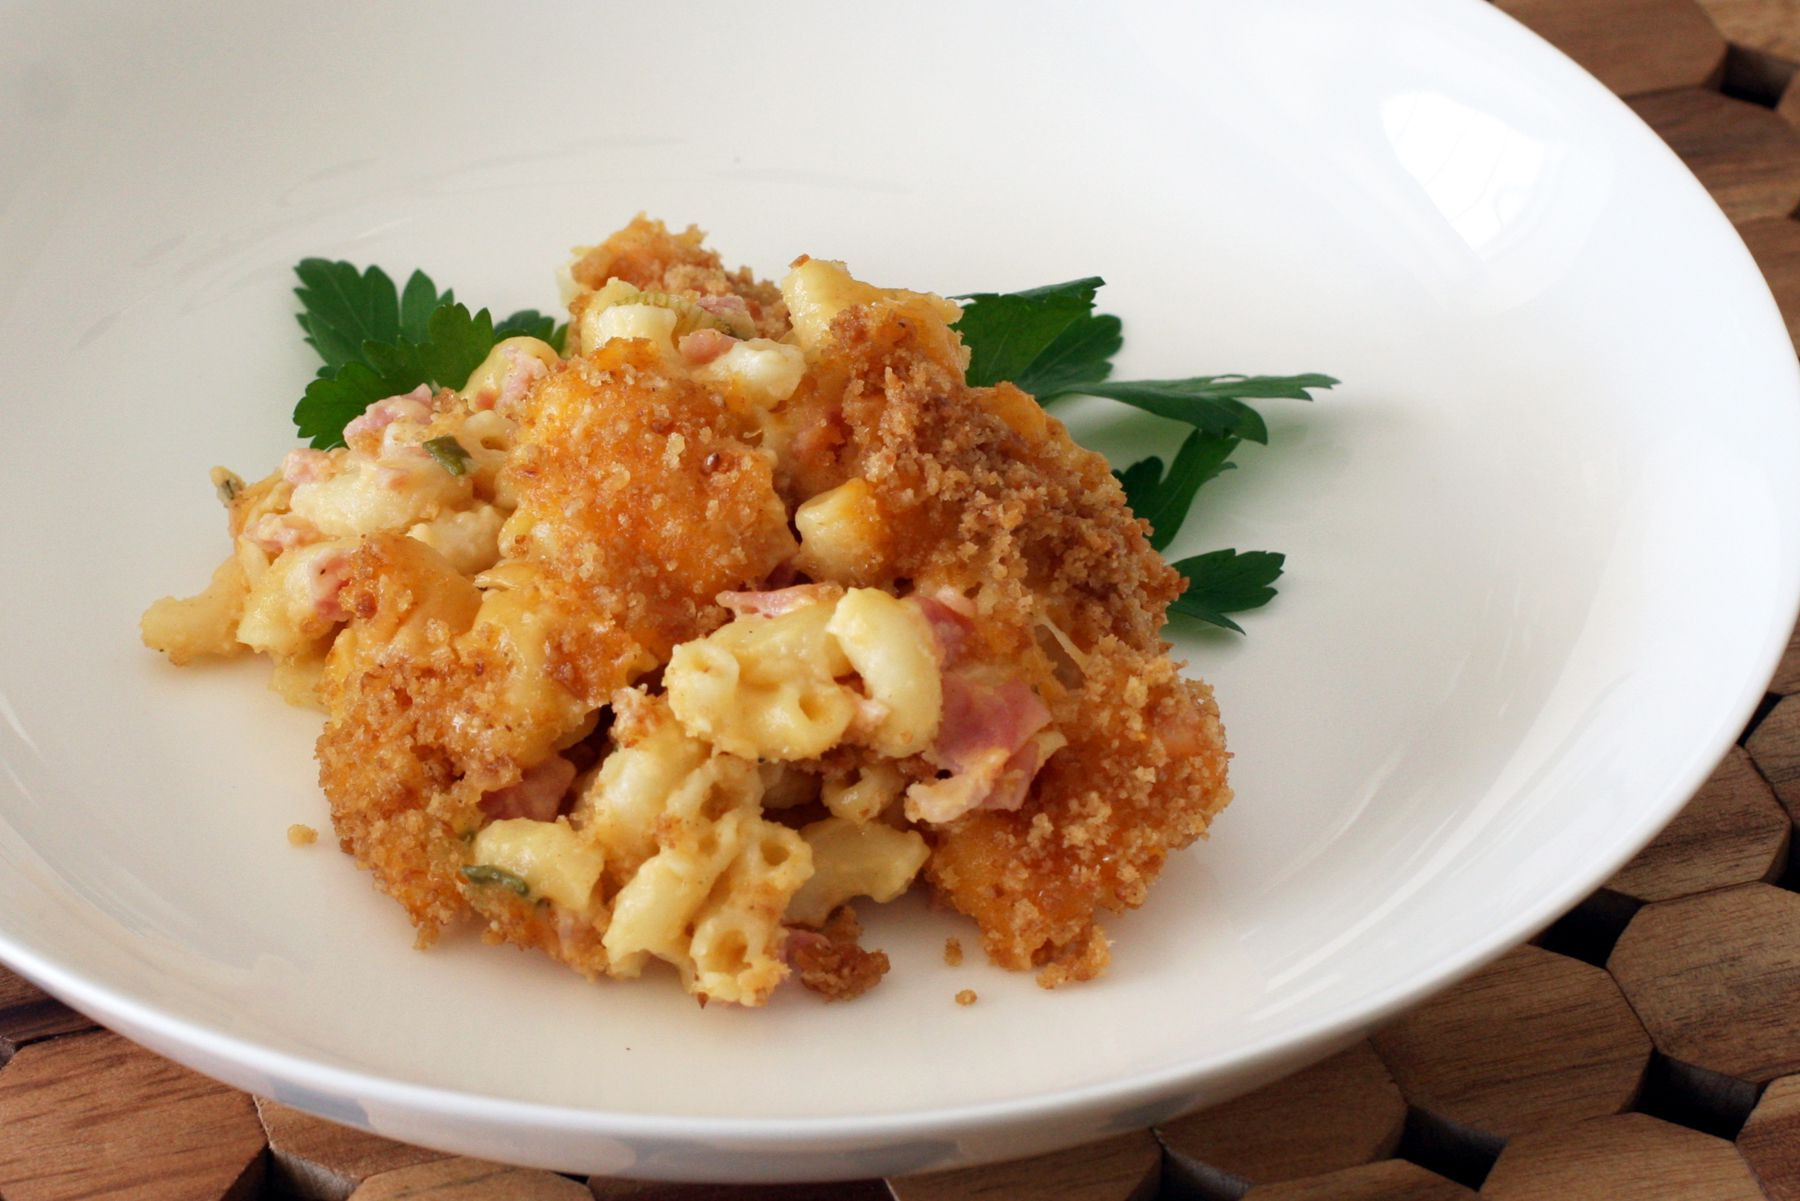 Baked Macaroni And Cheese With Ham Recipe
 Baked Macaroni and Cheese With Ham Recipe